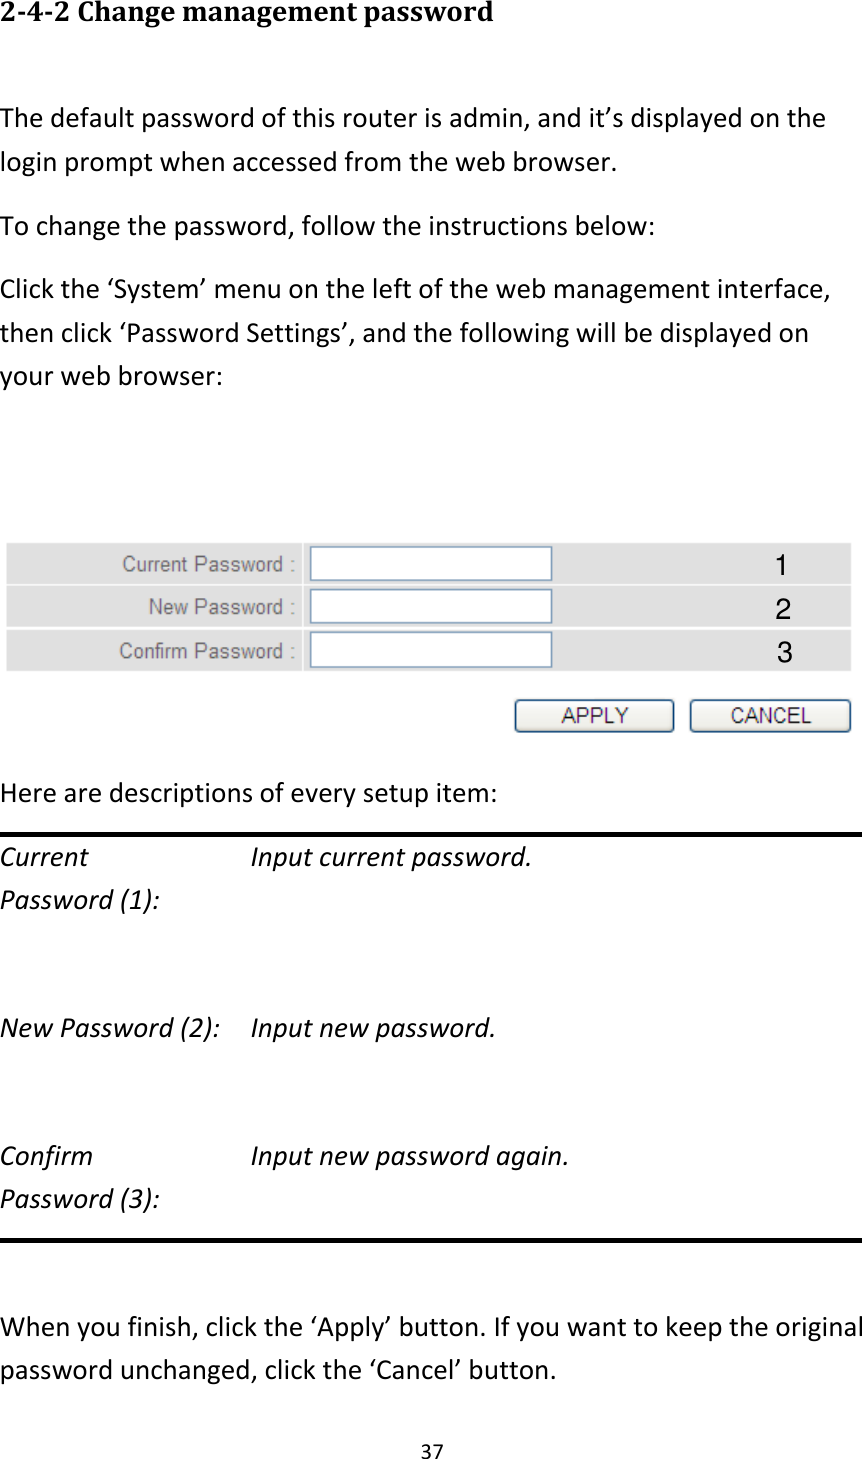 37 2-4-2 Change management password  The default password of this router is admin, and it’s displayed on the login prompt when accessed from the web browser.   To change the password, follow the instructions below: Click the ‘System’ menu on the left of the web management interface, then click ‘Password Settings’, and the following will be displayed on your web browser:    Here are descriptions of every setup item: Current        Input current password. Password (1):    New Password (2):    Input new password.  Confirm        Input new password again. Password (3):    When you finish, click the ‘Apply’ button. If you want to keep the original password unchanged, click the ‘Cancel’ button. 2 3 11 11 